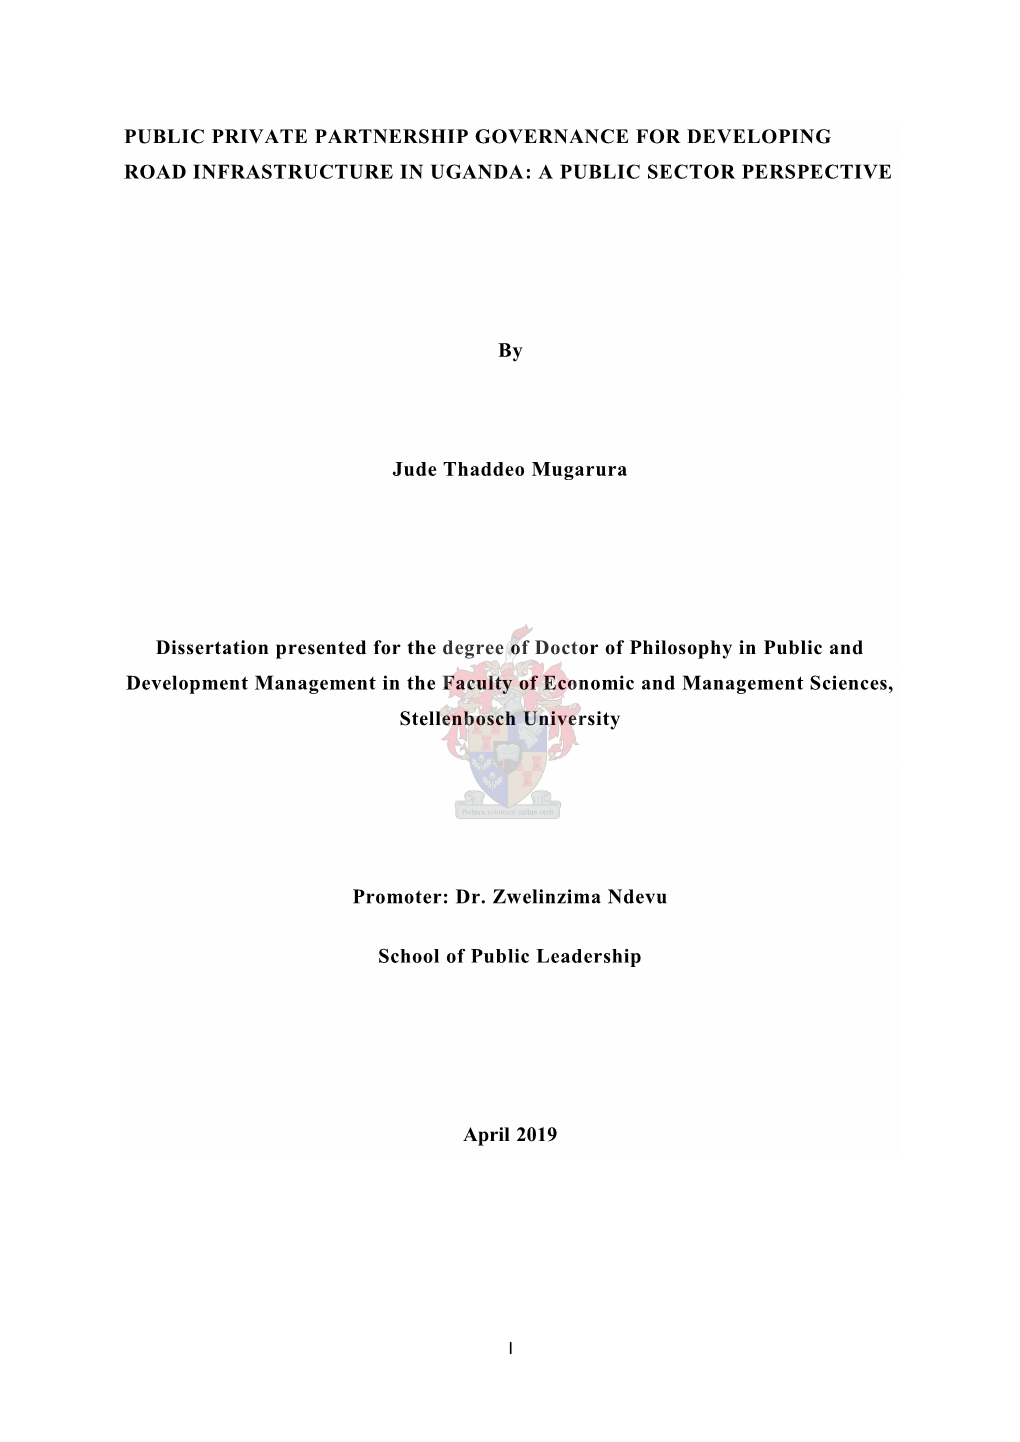 PUBLIC PRIVATE PARTNERSHIP GOVERNANCE for DEVELOPING ROAD INFRASTRUCTURE in UGANDA: a PUBLIC SECTOR PERSPECTIVE by Jude Thaddeo